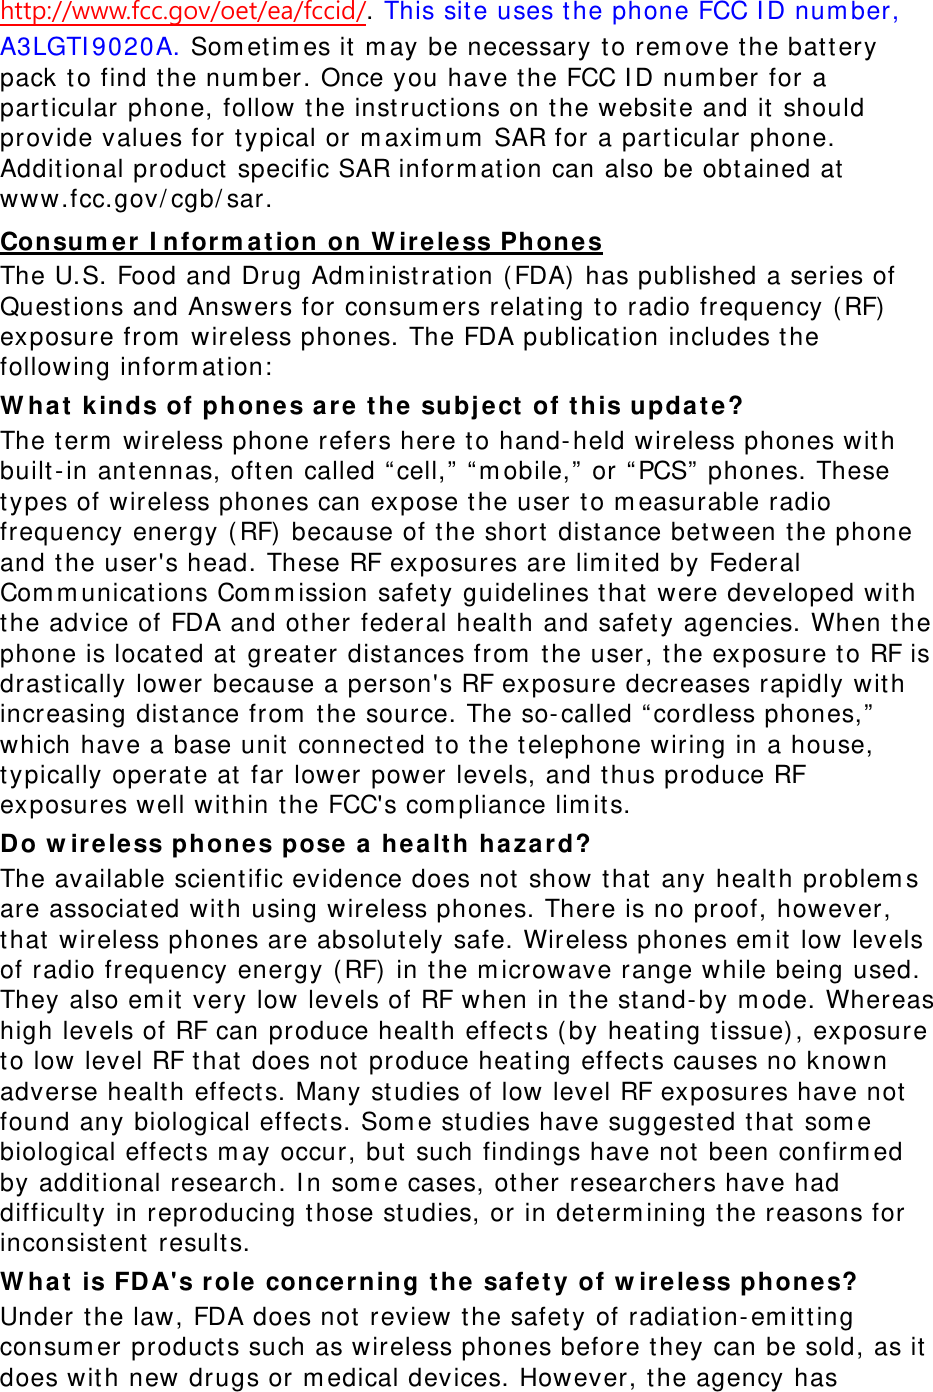 http://www.fcc.gov/oet/ea/fccid/. This sit e uses t he phone FCC I D num ber, A3LGTI 9020A. Som et im es it  m ay be necessary to rem ove t he batt ery pack t o find t he num ber. Once you have the FCC I D num ber for a part icular phone, follow the inst ruct ions on t he websit e and it should provide values for t ypical or m axim um  SAR for a particular phone. Addit ional product  specific SAR inform at ion can also be obt ained at  www.fcc.gov/ cgb/ sar. Consu m er I nfor m a t ion on W irele ss Phone s The U.S. Food and Drug Adm inist rat ion (FDA)  has published a series of Quest ions and Answers for consum ers relat ing t o radio frequency ( RF) exposure from  wireless phones. The FDA publicat ion includes t he following inform at ion:  W h a t  k in ds of phones a re t he subje ct  of t his u pda t e? The t erm  wireless phone refers here to hand- held wireless phones wit h built- in ant ennas, oft en called “ cell,” “ m obile,”  or “ PCS”  phones. These types of wireless phones can expose t he user to m easurable radio frequency energy ( RF)  because of the short  dist ance between t he phone and t he user&apos;s head. These RF exposures are lim it ed by Federal Com m unicat ions Com m ission safet y guidelines t hat  were developed wit h the advice of FDA and ot her federal health and safet y agencies. When t he phone is locat ed at  great er dist ances from  t he user, t he exposure t o RF is drast ically lower because a person&apos;s RF exposure decreases rapidly with increasing dist ance from  the source. The so- called “ cordless phones,”  which have a base unit  connect ed t o t he t elephone wiring in a house, typically operat e at  far lower power levels, and t hus produce RF exposures well wit hin t he FCC&apos;s com pliance lim it s. Do w ir ele ss ph one s pose  a  hea lt h hazard? The available scient ific evidence does not  show t hat  any healt h problem s are associat ed wit h using wireless phones. There is no proof, however, that  wireless phones are absolutely safe. Wireless phones em it  low levels of radio frequency energy ( RF)  in t he m icrowave range while being used. They also em it  very low levels of RF when in t he st and- by m ode. Whereas high levels of RF can produce healt h effects ( by heating t issue) , exposure to low level RF t hat  does not  produce heat ing effects causes no known adverse healt h effect s. Many st udies of low level RF exposures have not  found any biological effect s. Som e st udies have suggest ed t hat  som e biological effect s m ay occur, but  such findings have not been confirm ed by addit ional research. I n som e cases, ot her researchers have had difficult y in reproducing t hose studies, or in det erm ining t he reasons for inconsist ent results. W h a t  is FDA&apos;s r ole  concer ning t he safety of w ireless phones? Under t he law, FDA does not review the safety of radiat ion- em itt ing consum er product s such as wireless phones before they can be sold, as it  does wit h new drugs or m edical devices. However, t he agency has 